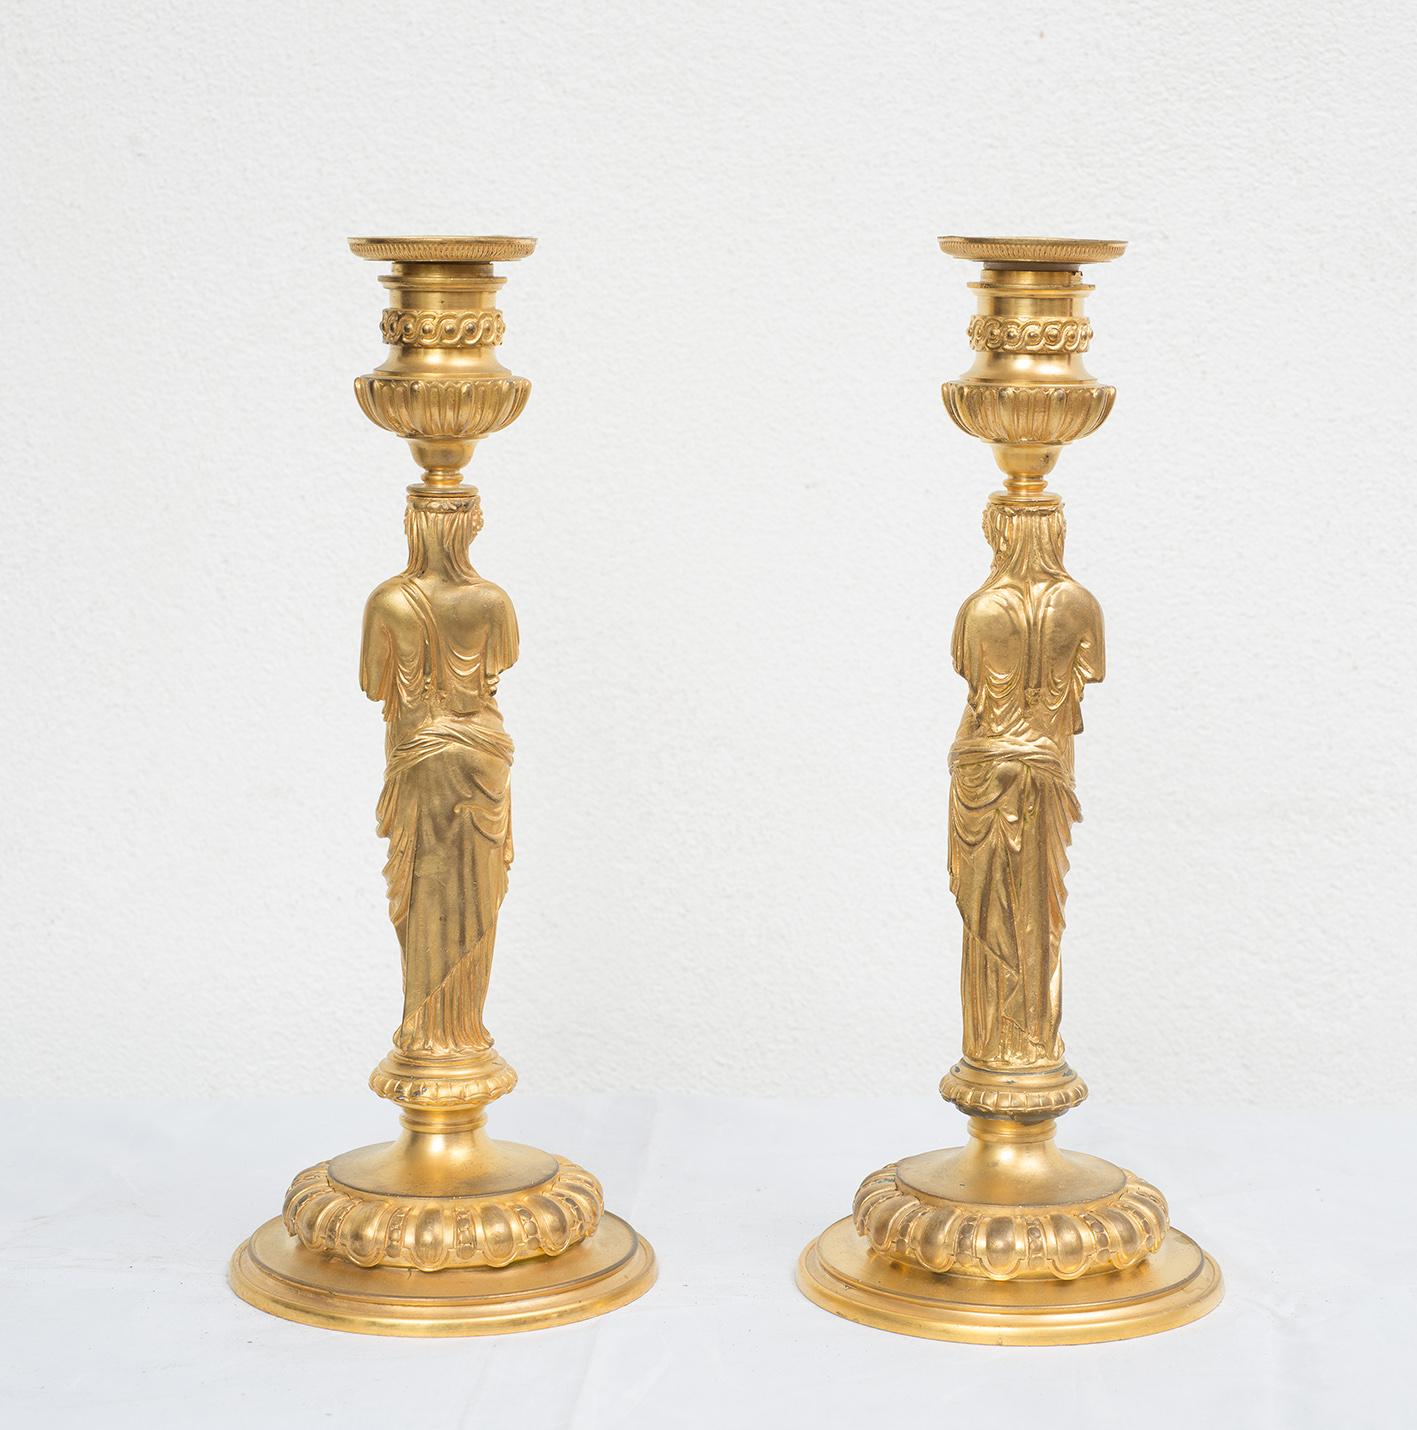 Pair of antique French Empire candelabra signed 